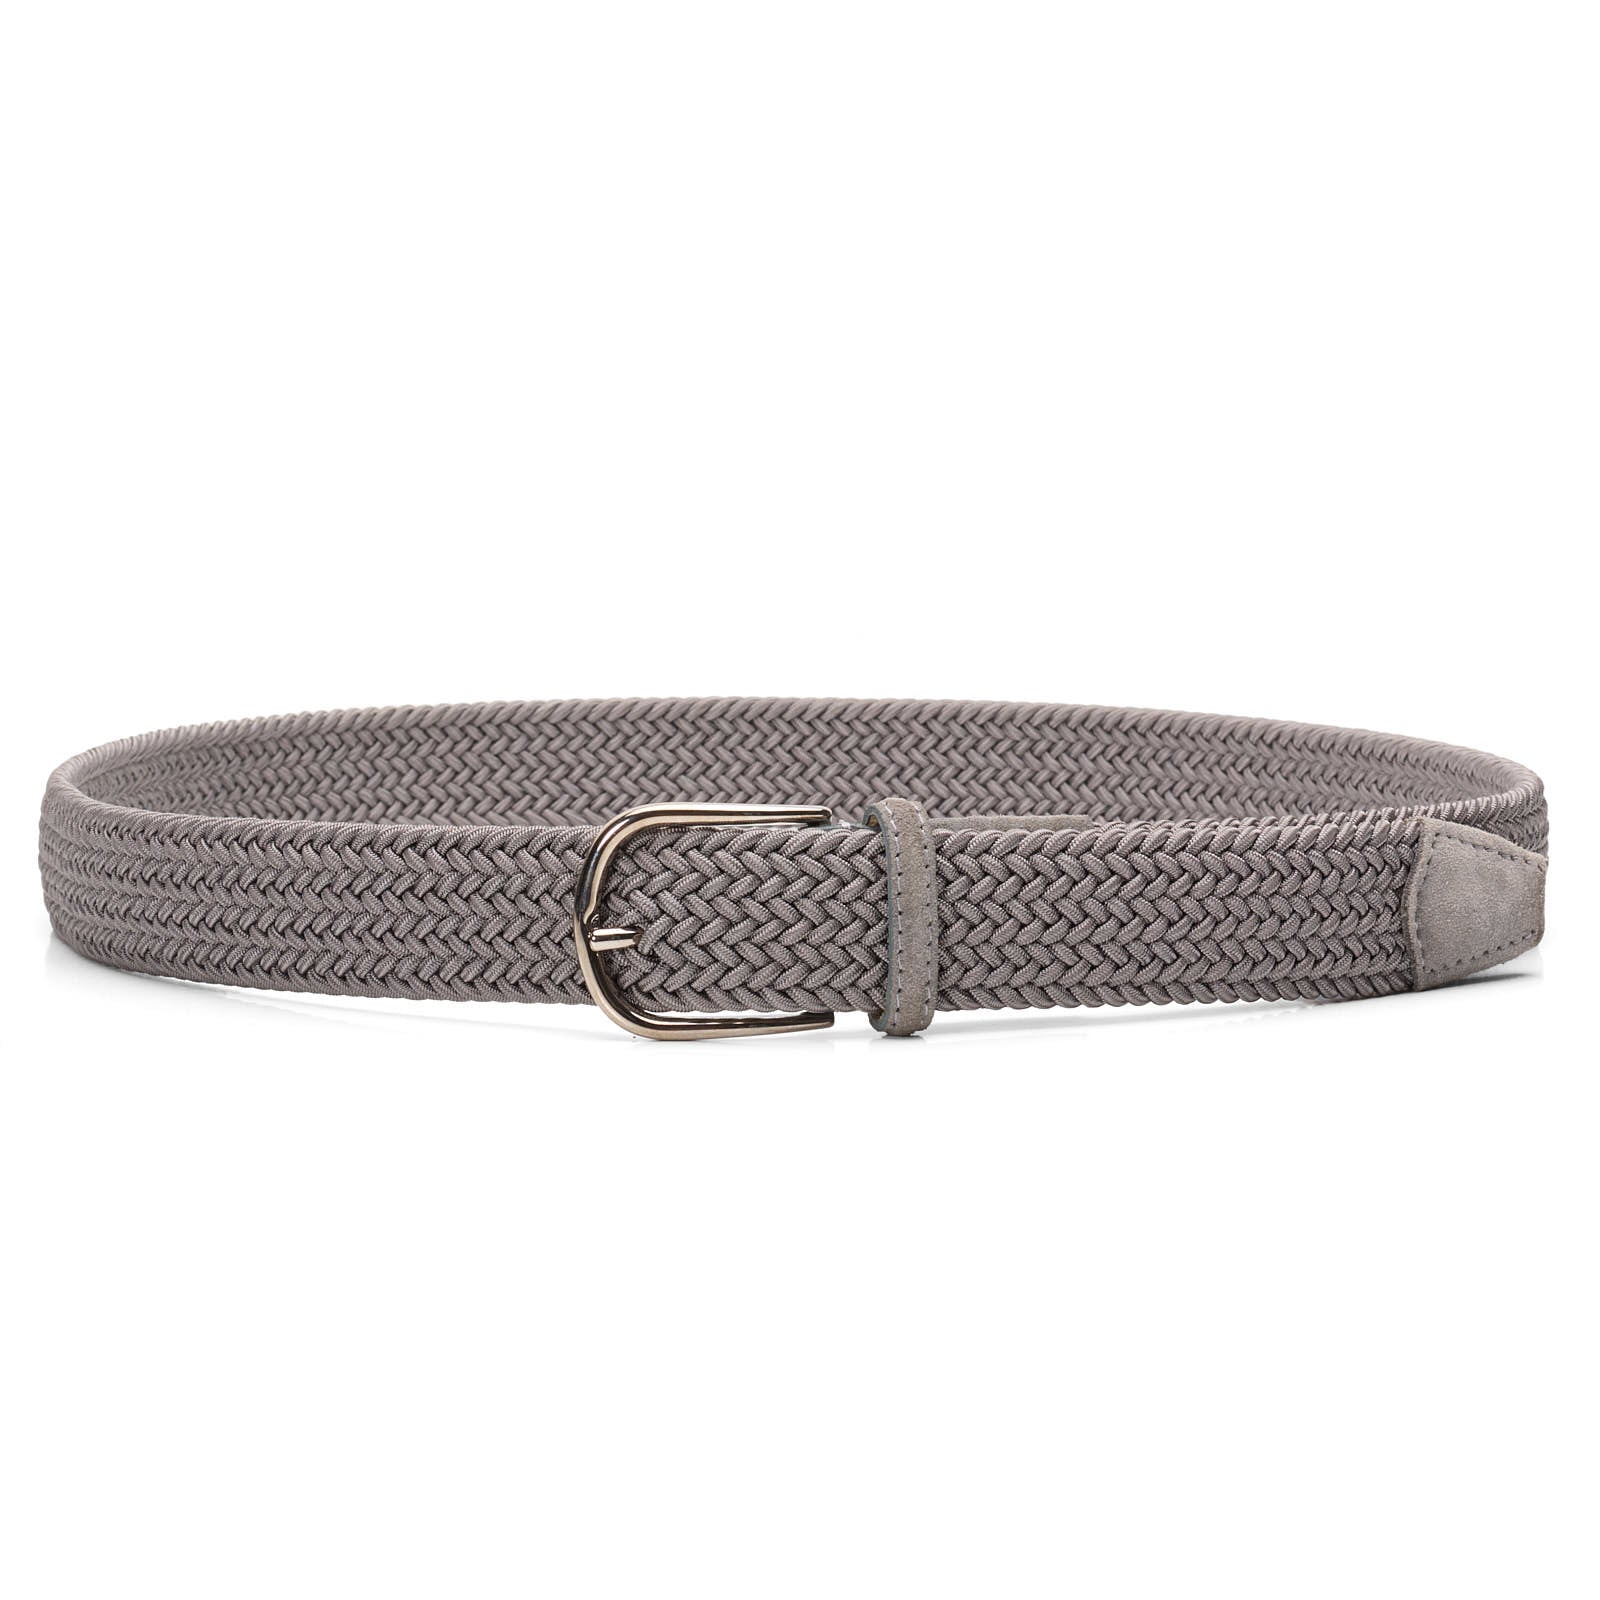 PAOLO VITALE for VANNUCCI Milano Gray Stretch Woven Braided Belt 125cm NEW 50"